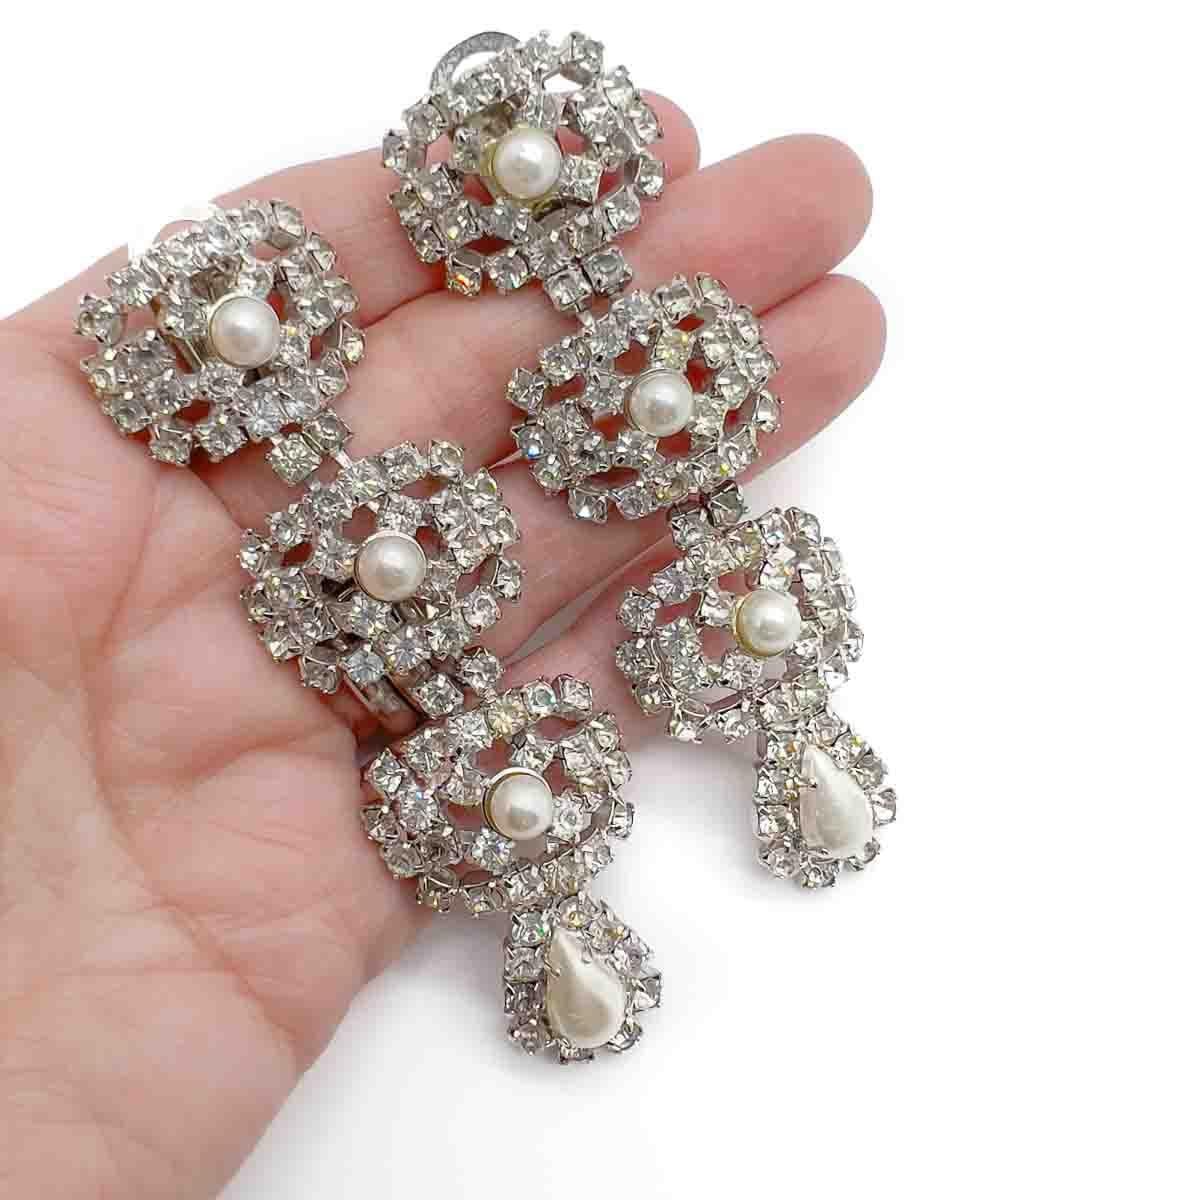 Vintage Statement Crystal & Pearl Drop Earrings 1950s In Good Condition For Sale In Wilmslow, GB